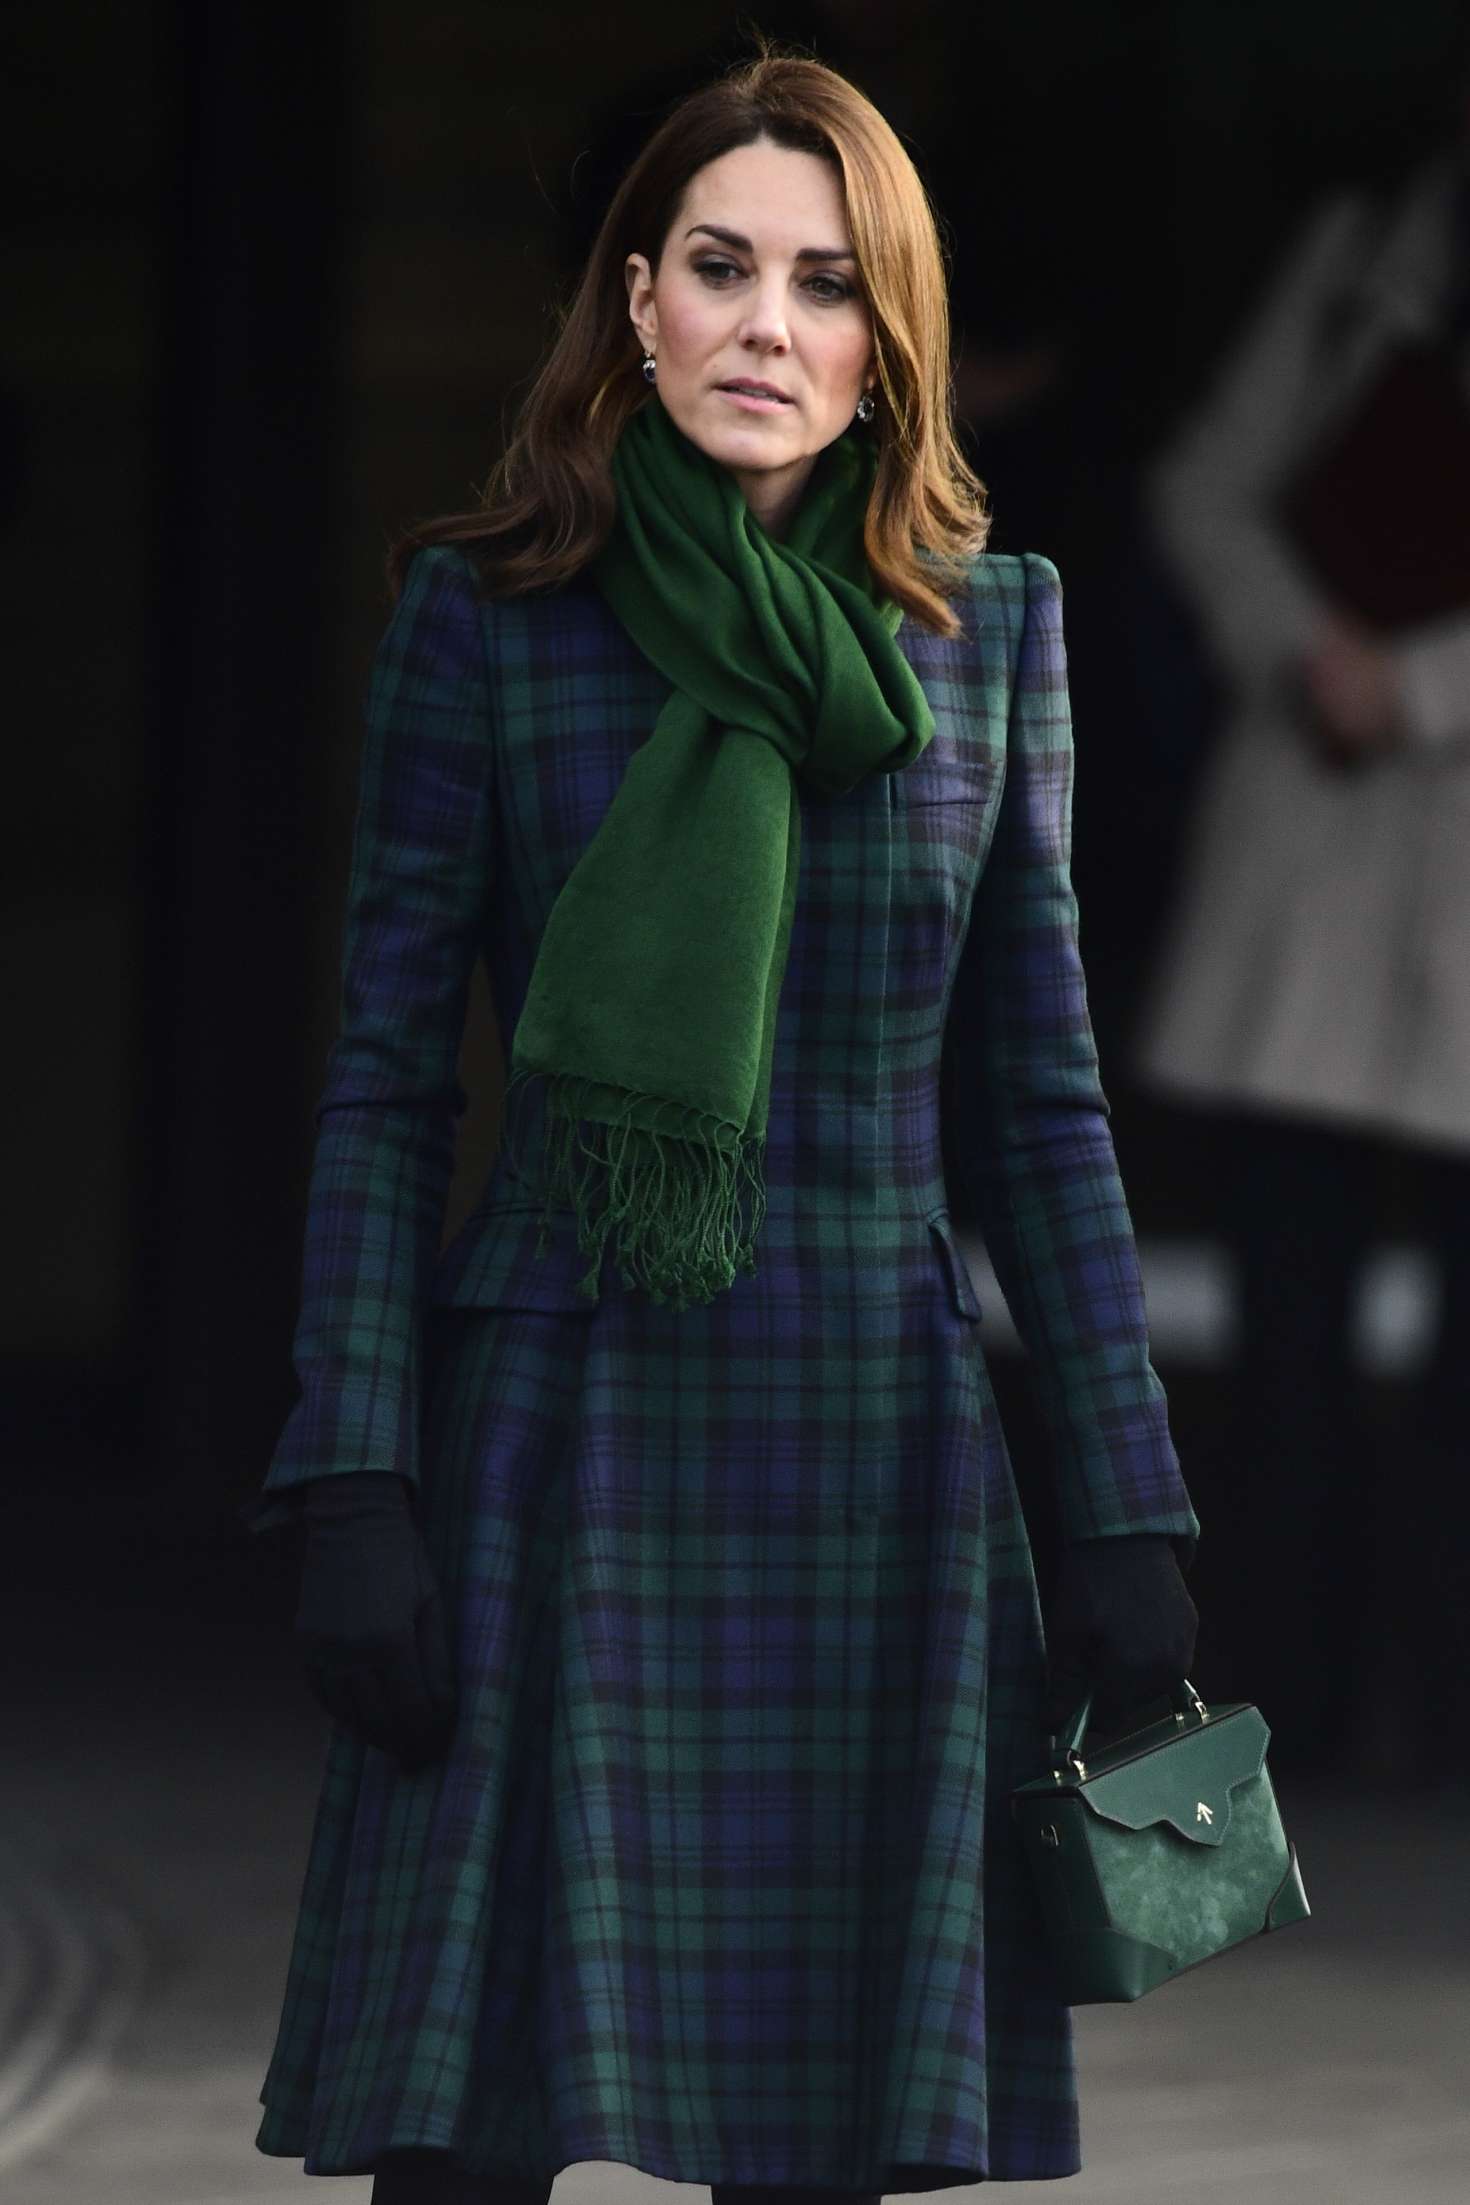 Kate Middleton at Mental Health In Education Conference in London